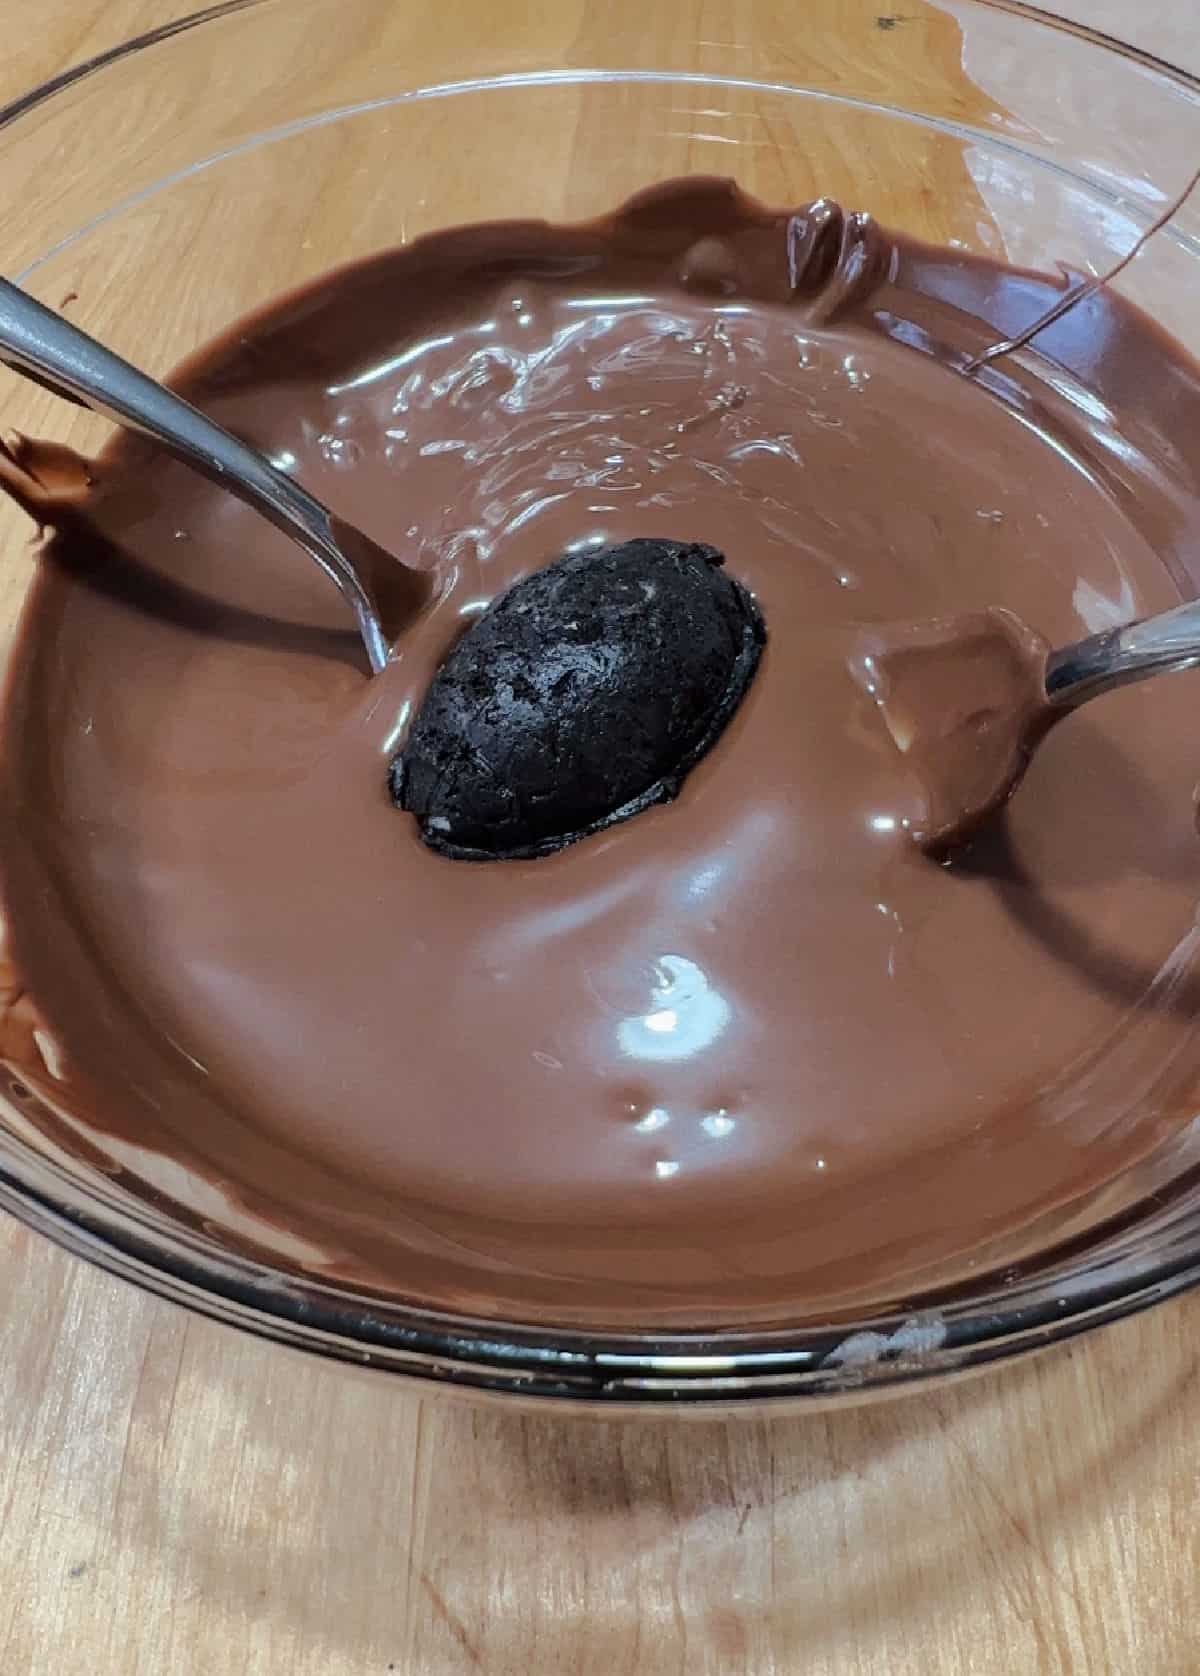 Oreo footbqall truffle placed in the bowl of melted chocolate coating.